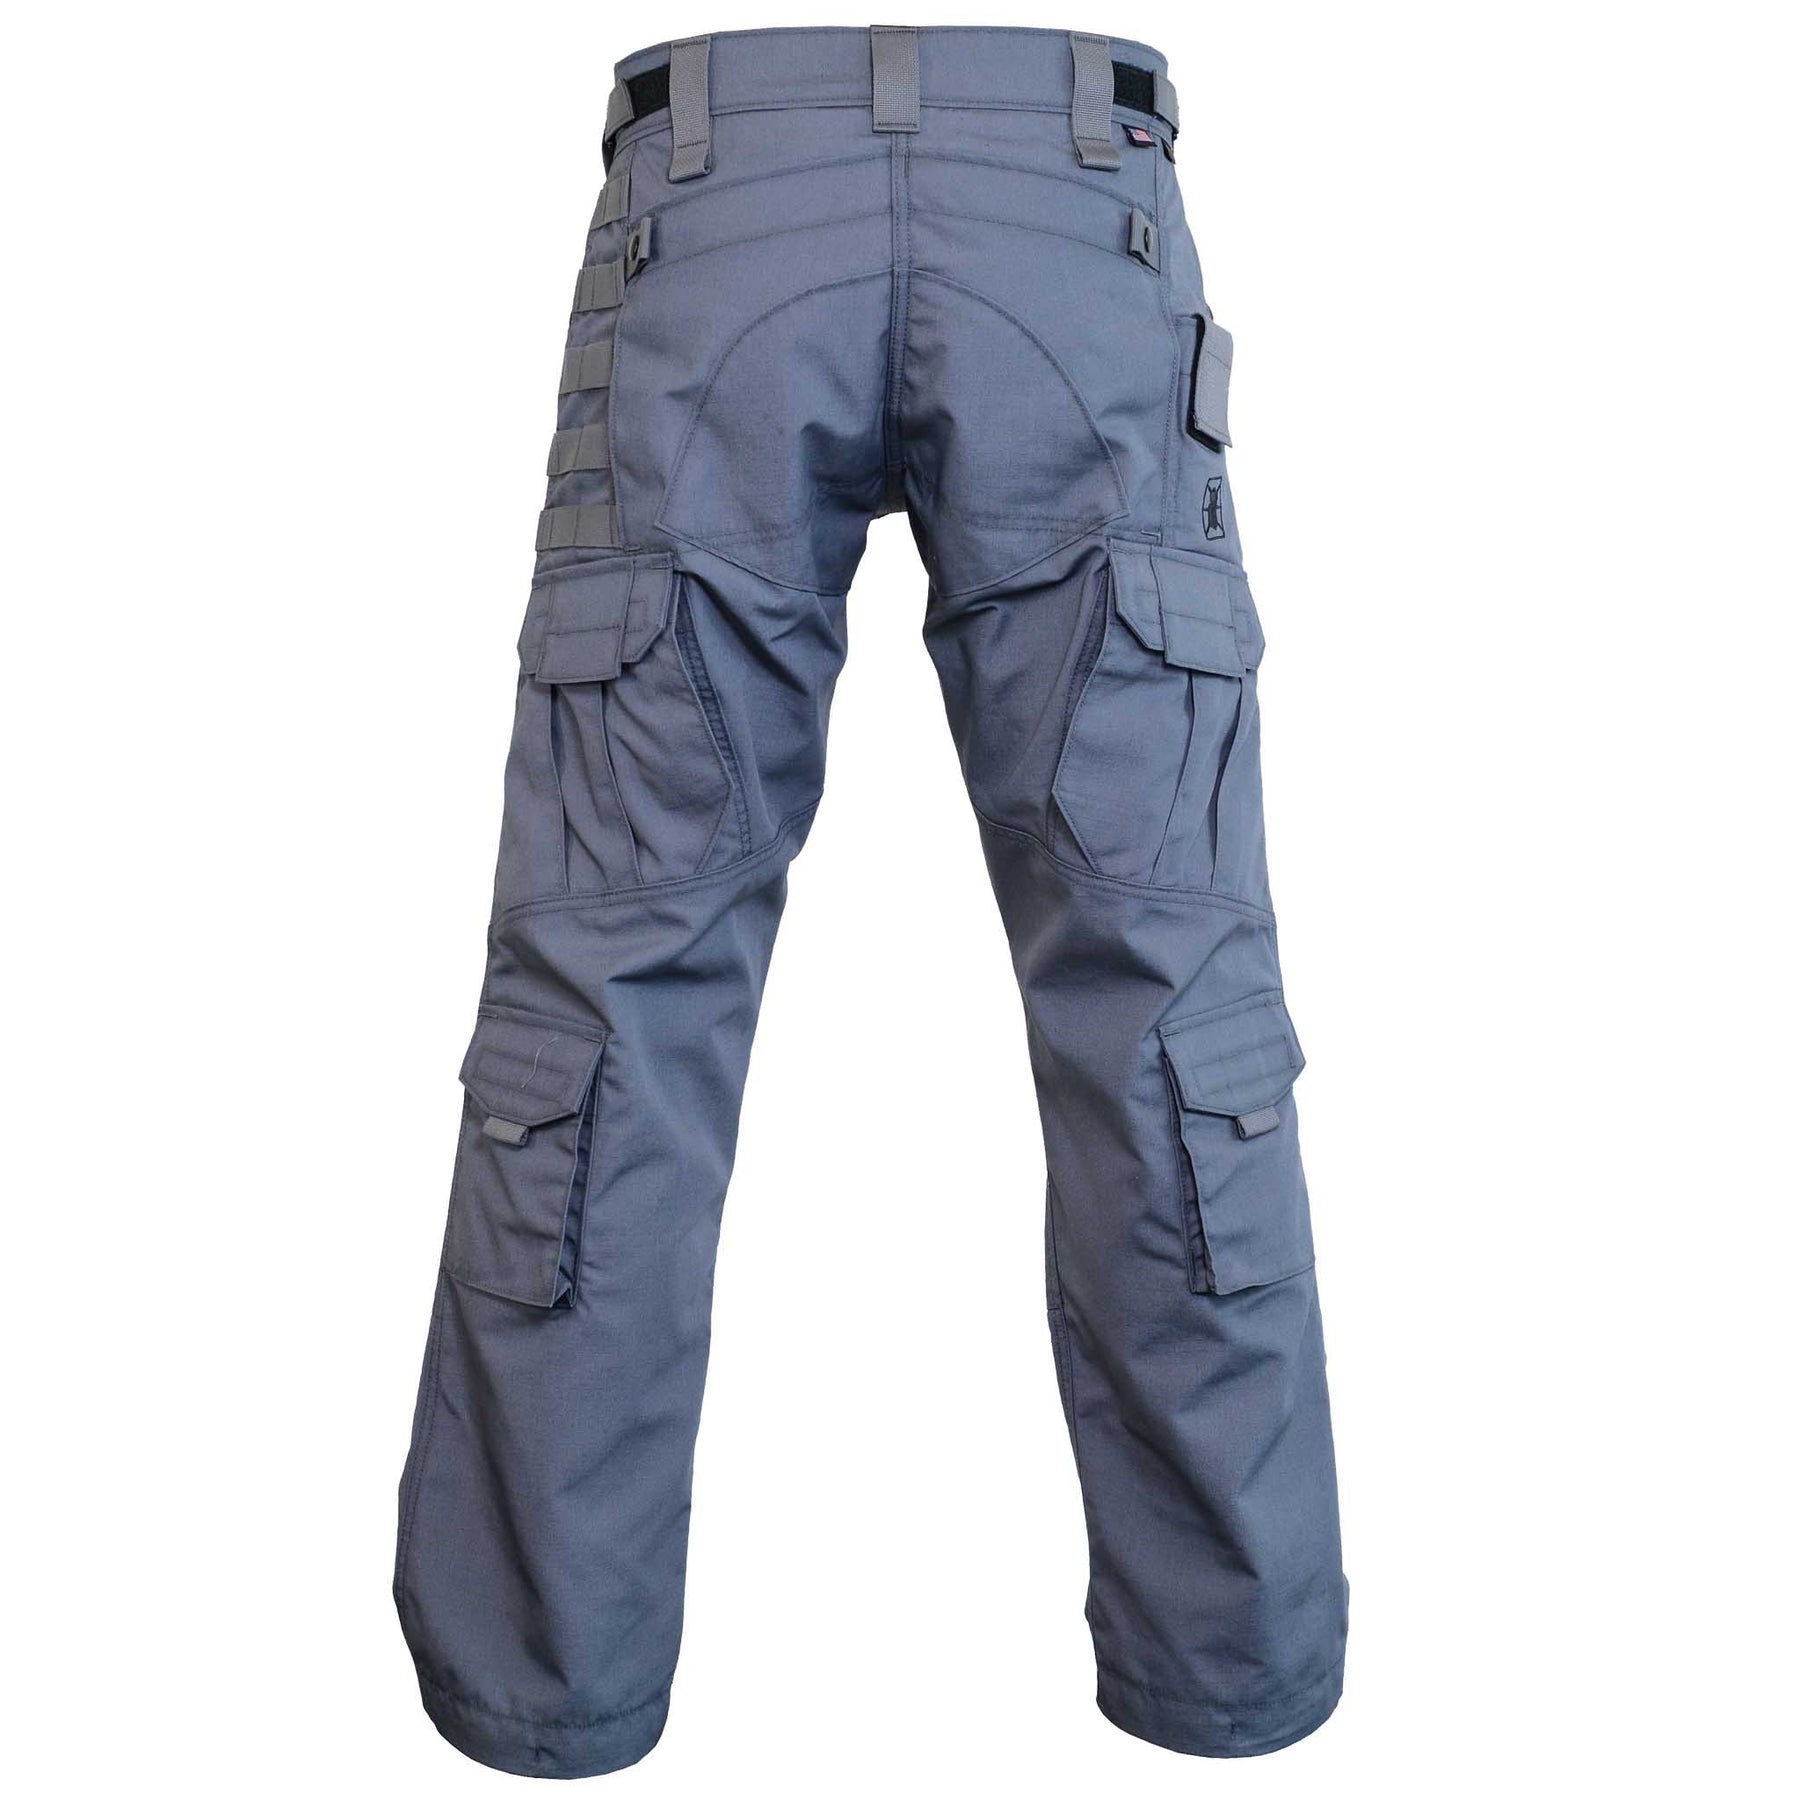 Jupiter Gear High-Waisted Tactical Leggings W Cargo Pockets - Blue Camo -  17 requests